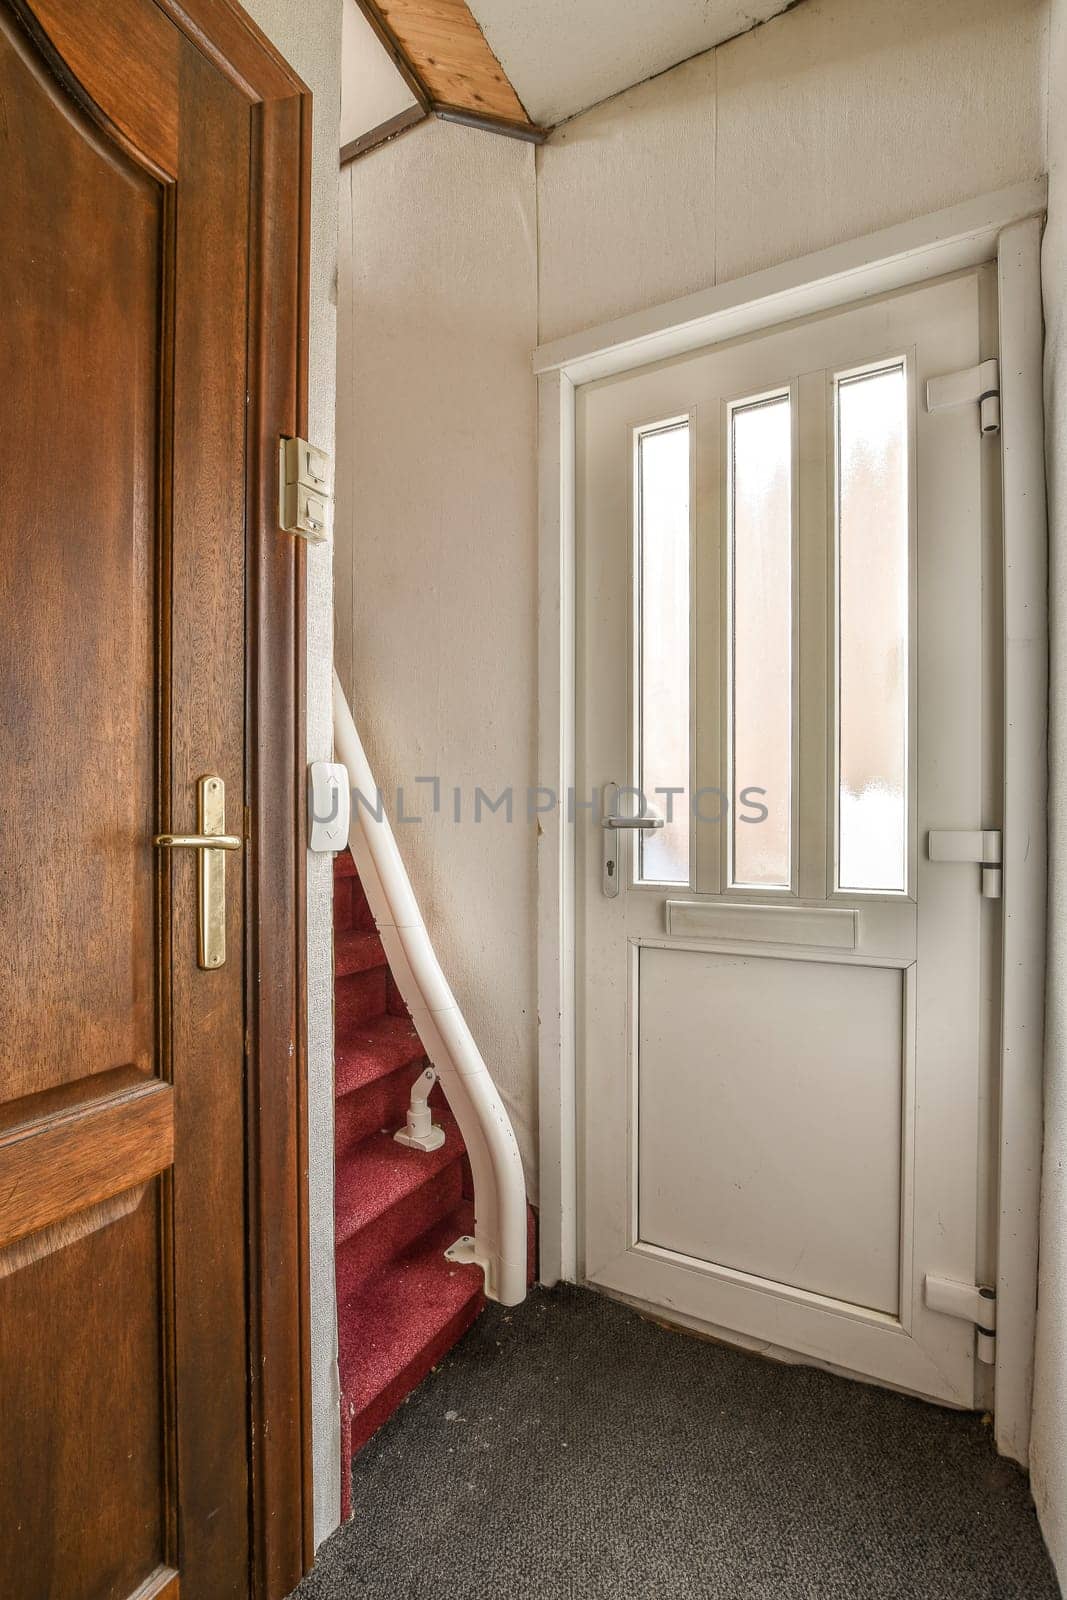 a room with a red carpet and a white door that is open to reveal the stairs in front of it